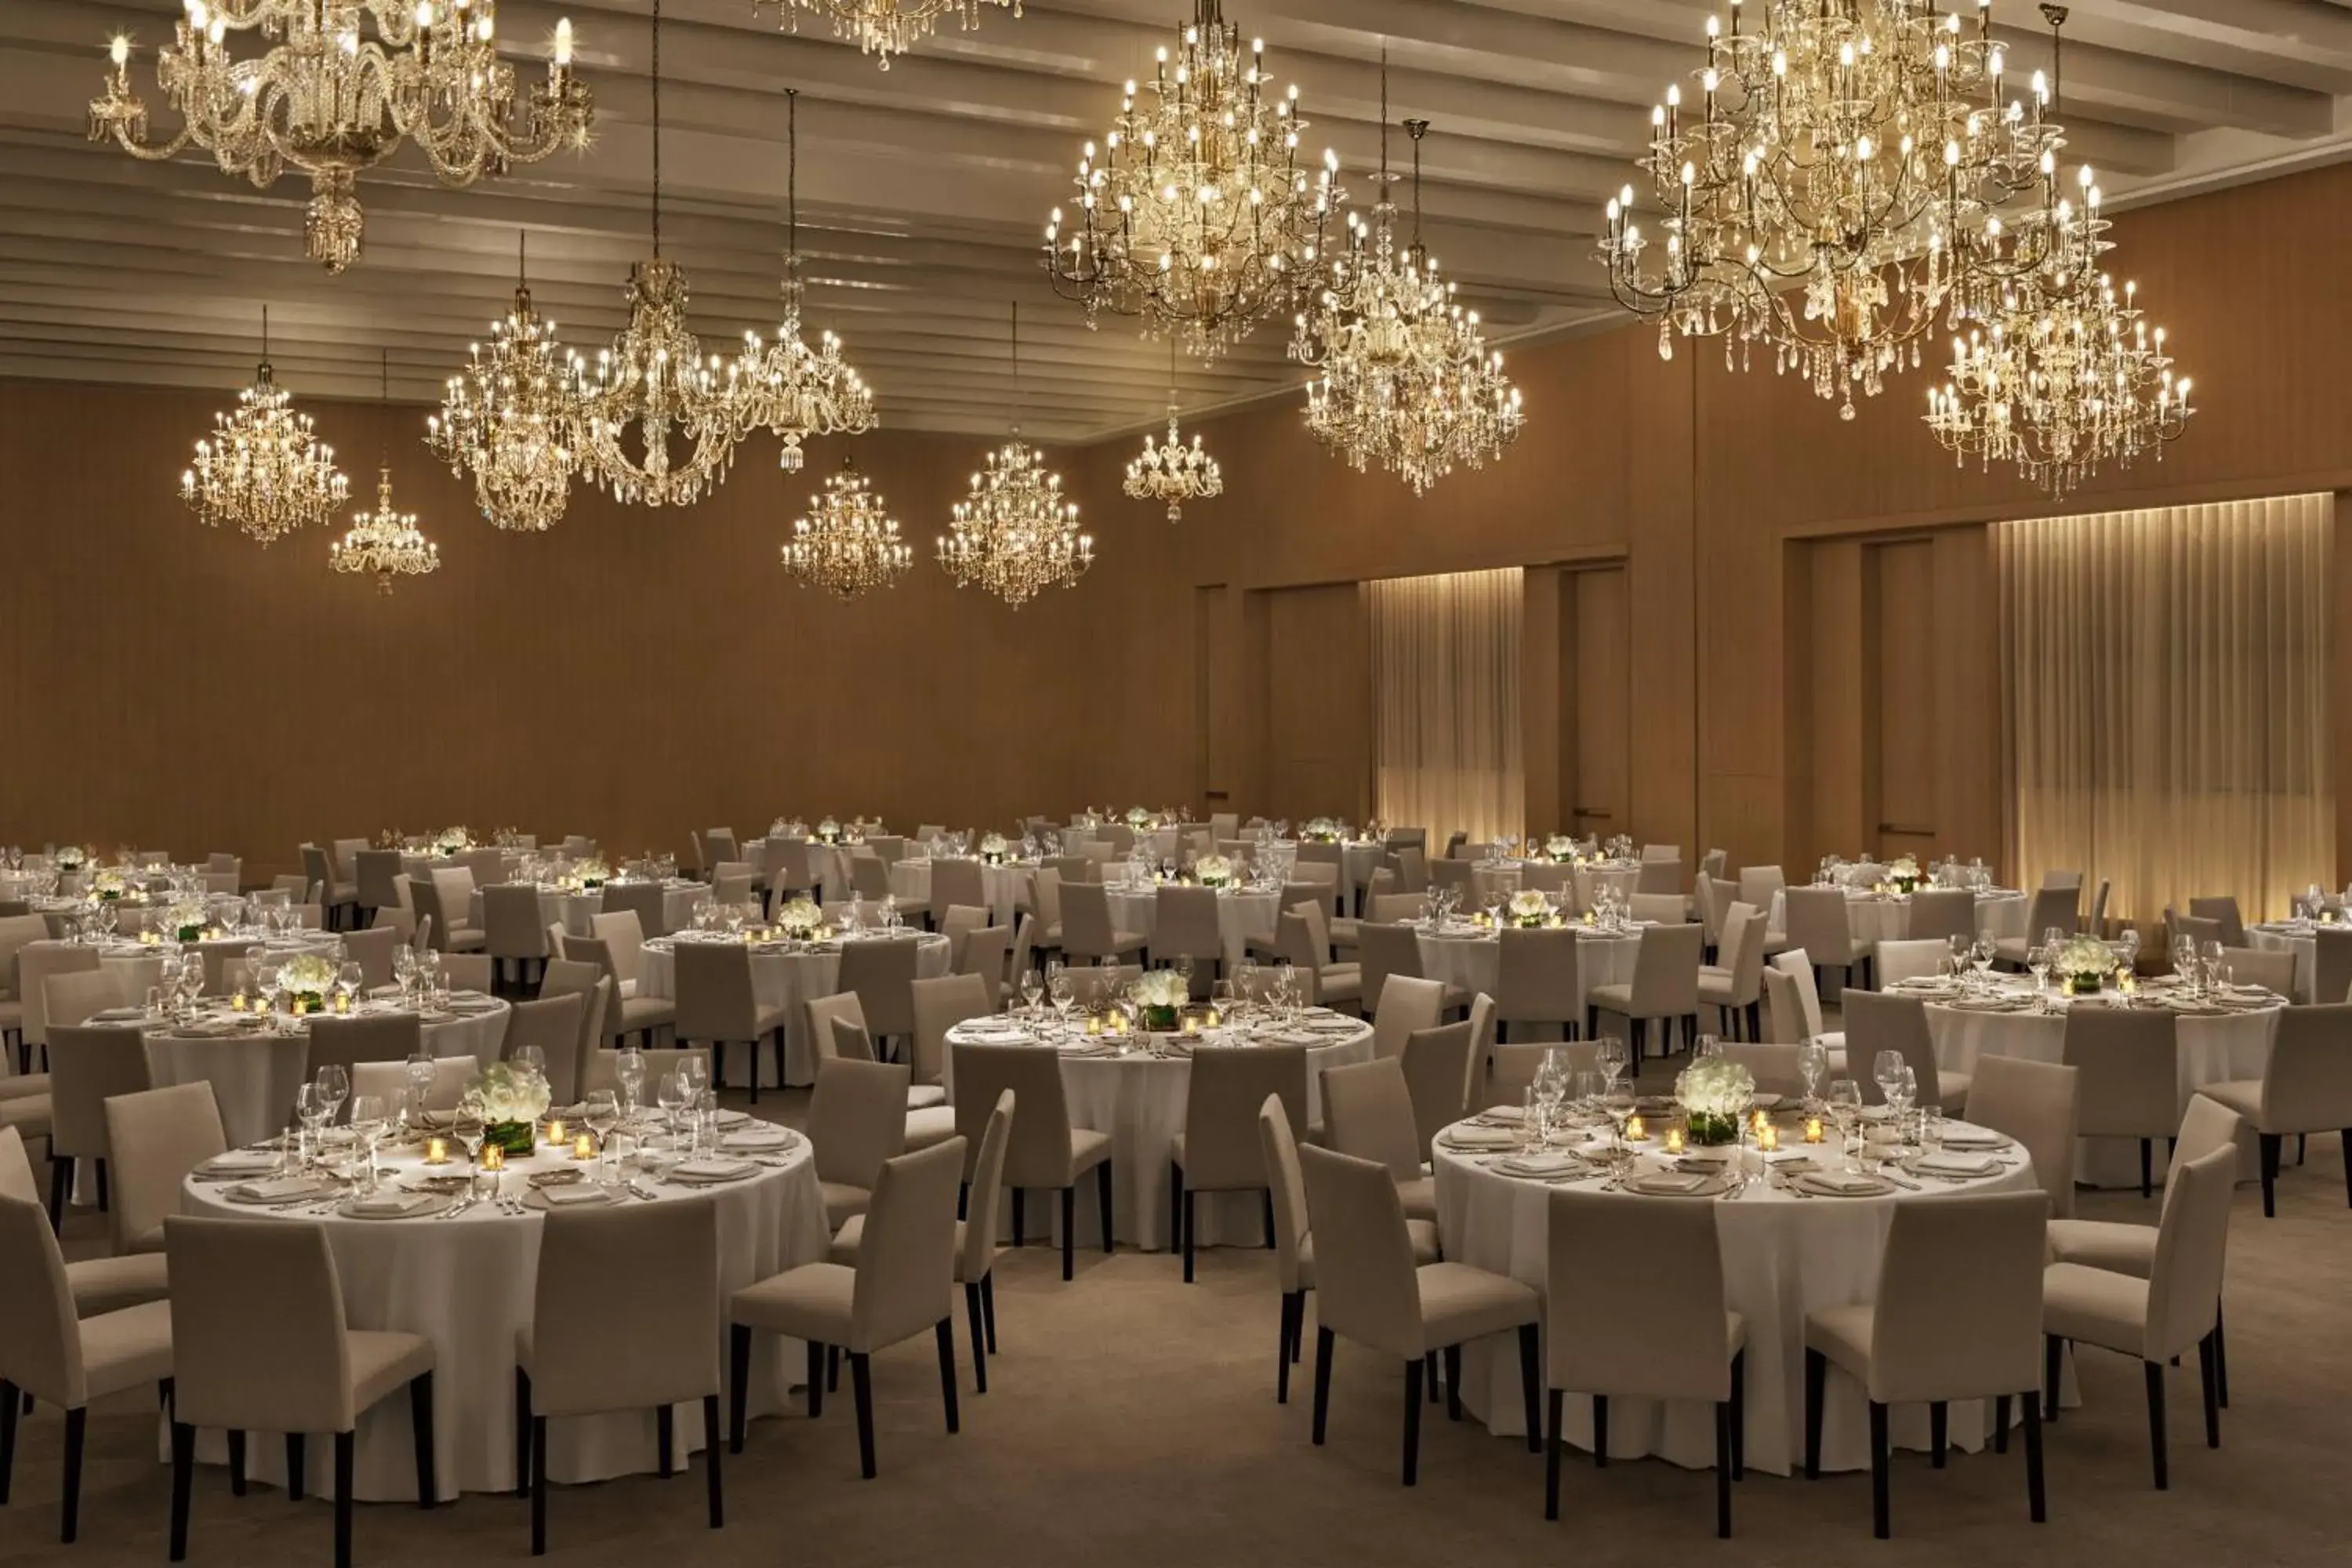 Banquet/Function facilities, Banquet Facilities in The Singapore EDITION